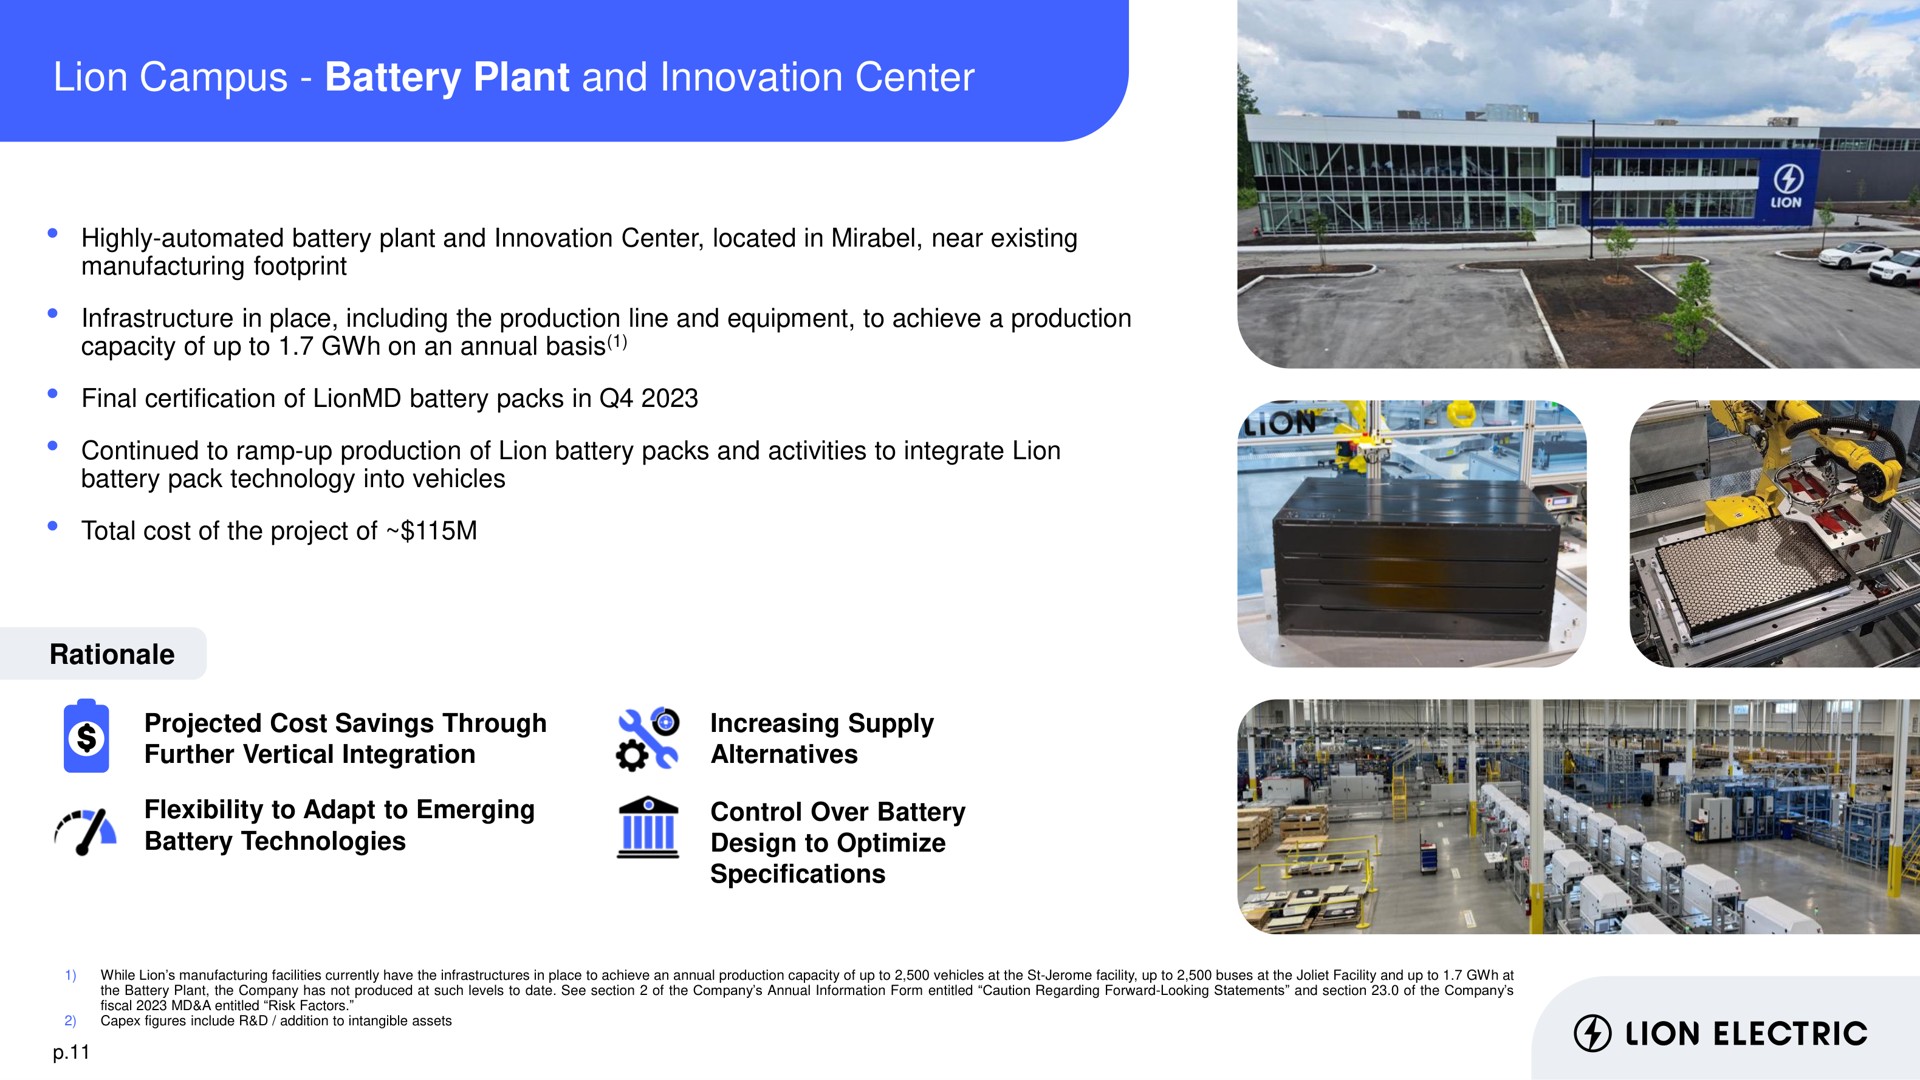 lion campus battery plant and innovation center highly located in near existing manufacturing footprint infrastructure in place including the production line equipment to achieve a production capacity of up to on an annual basis final certification of packs in continued to ramp up production of packs activities to integrate pack technology into vehicles total cost of the project of rationale projected cost savings through further vertical integration flexibility to adapt to emerging technologies specifications control over design to optimize increasing supply alternatives electric | Lion Electric